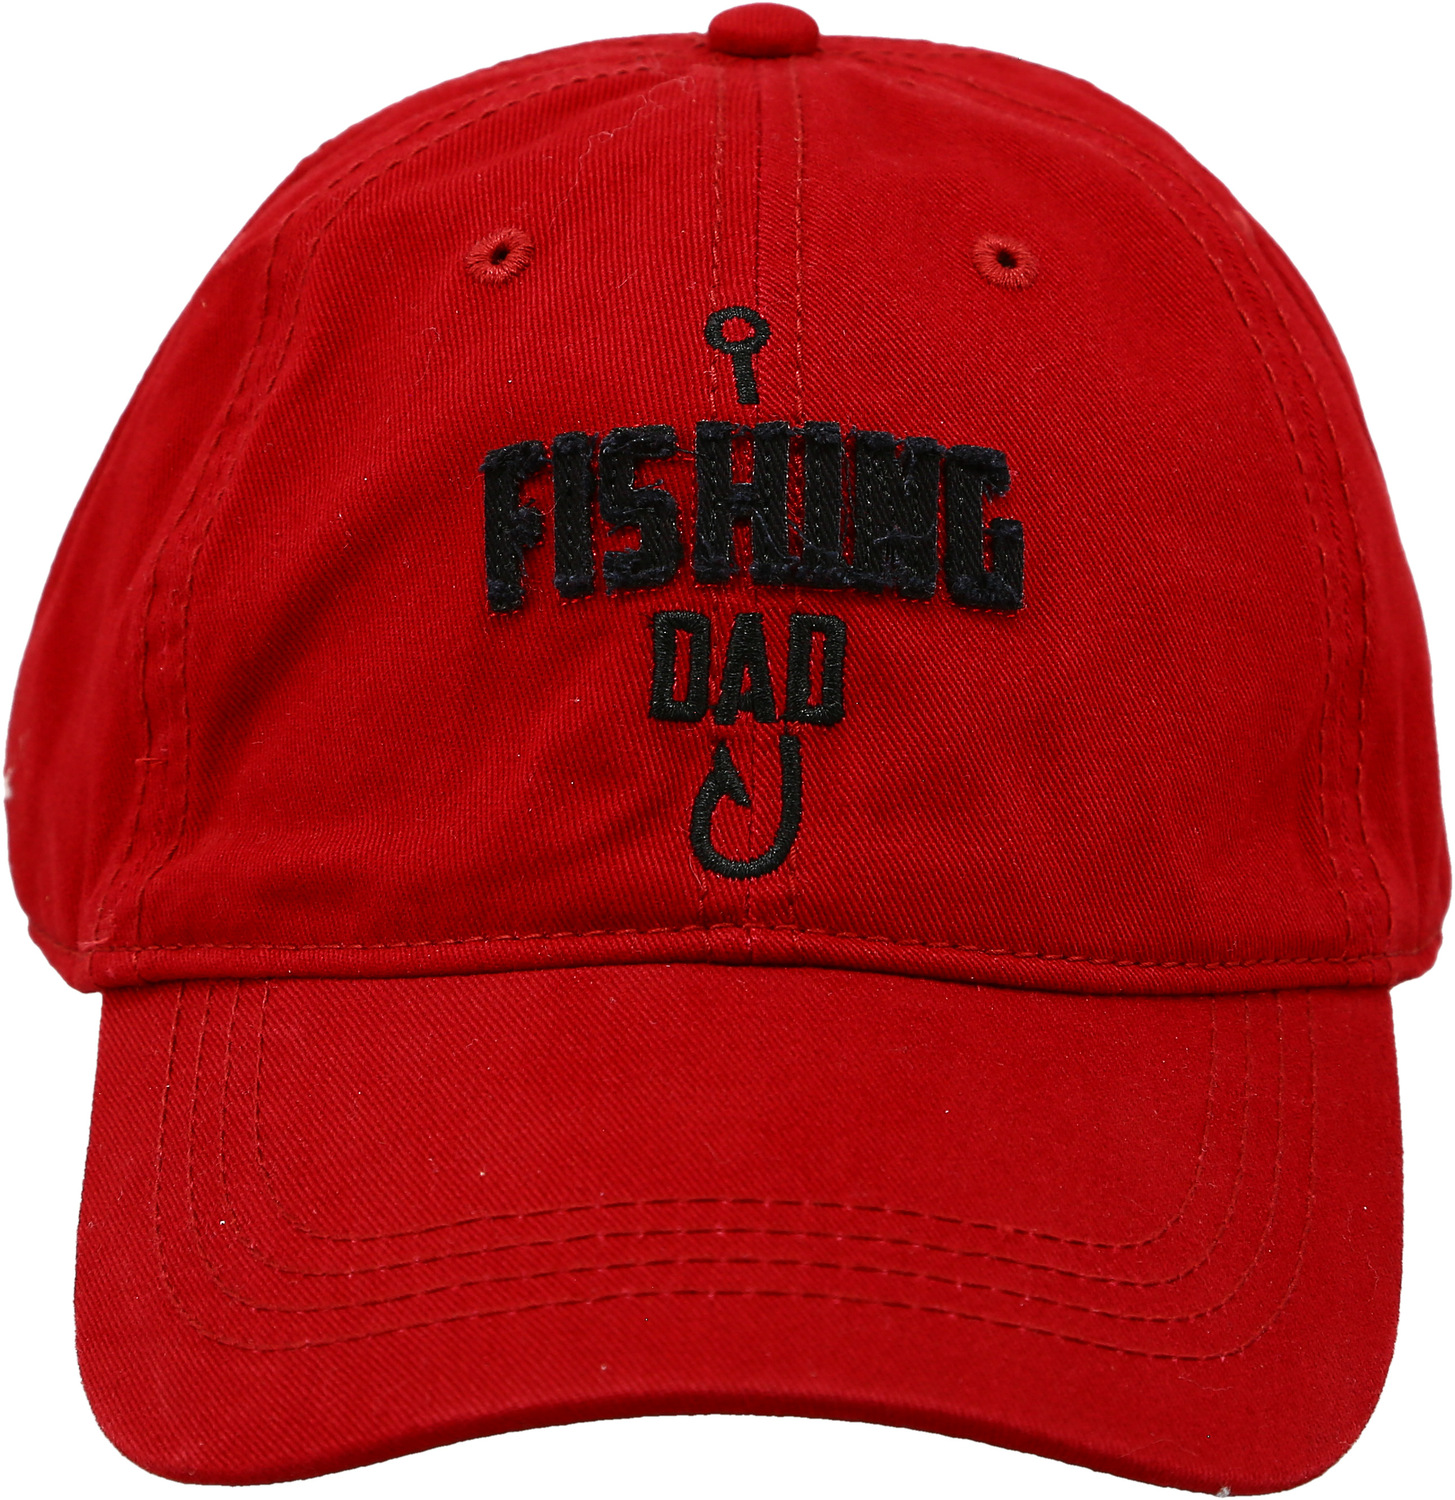 Fishing Dad by Man Out - Fishing Dad - Red Adjustable Hat